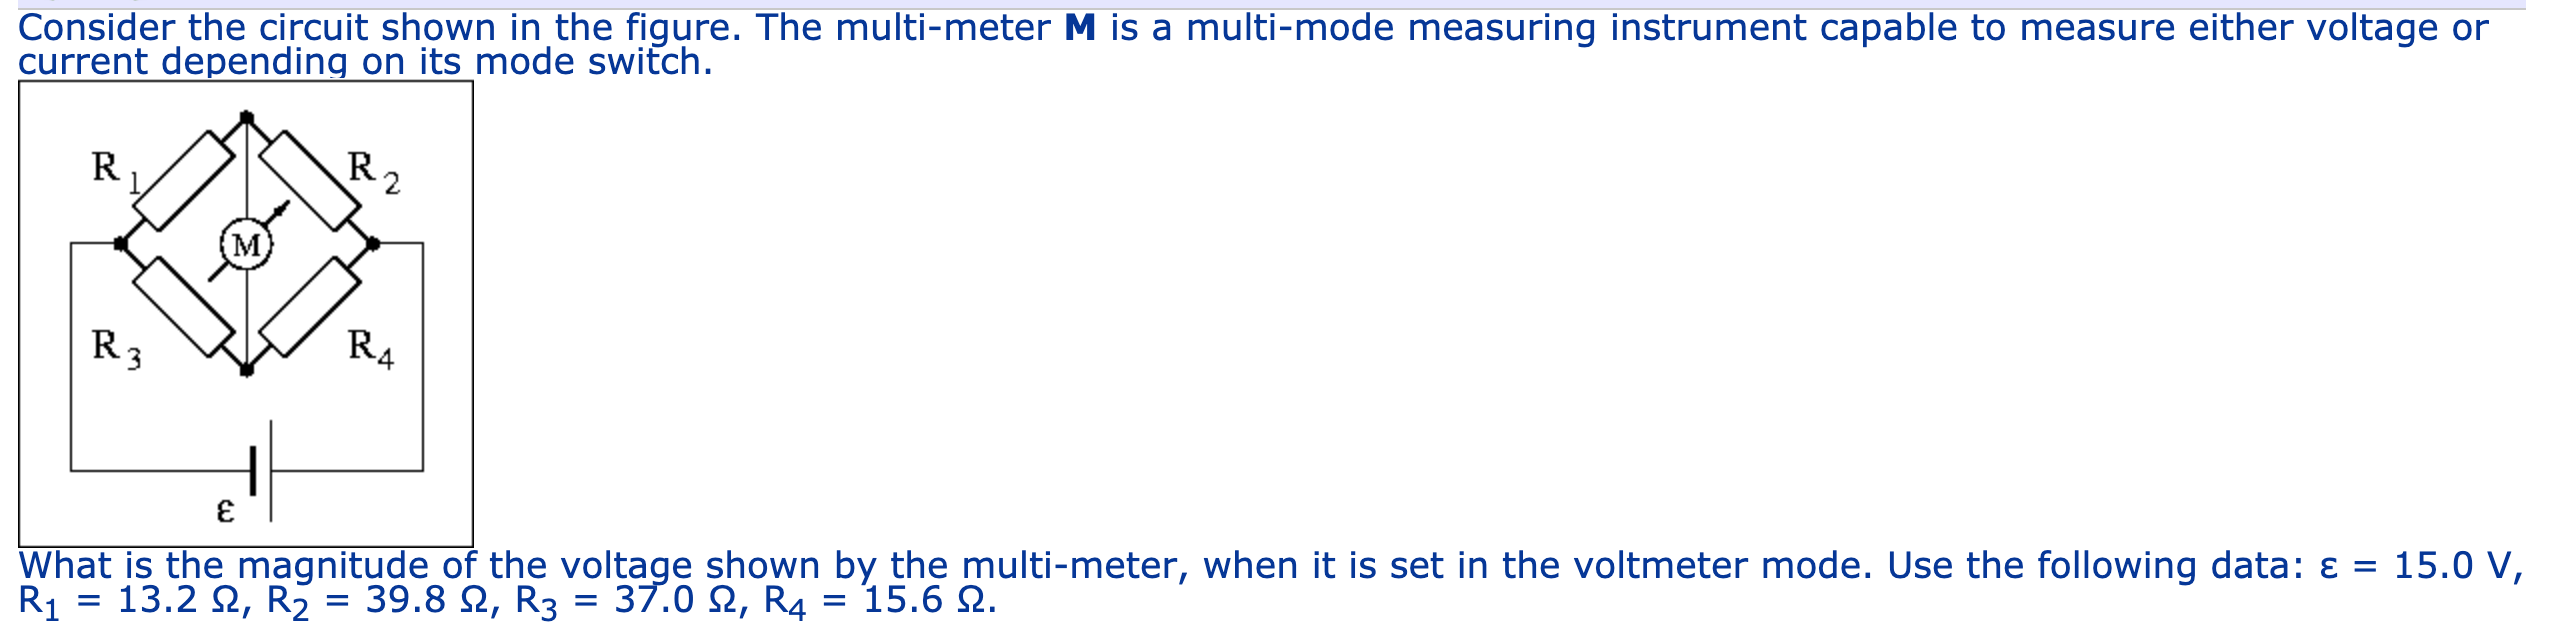 Consider the circuit shown in the figure. the multi-meter m is a multi-mode measuring instrument capable to measure either vo